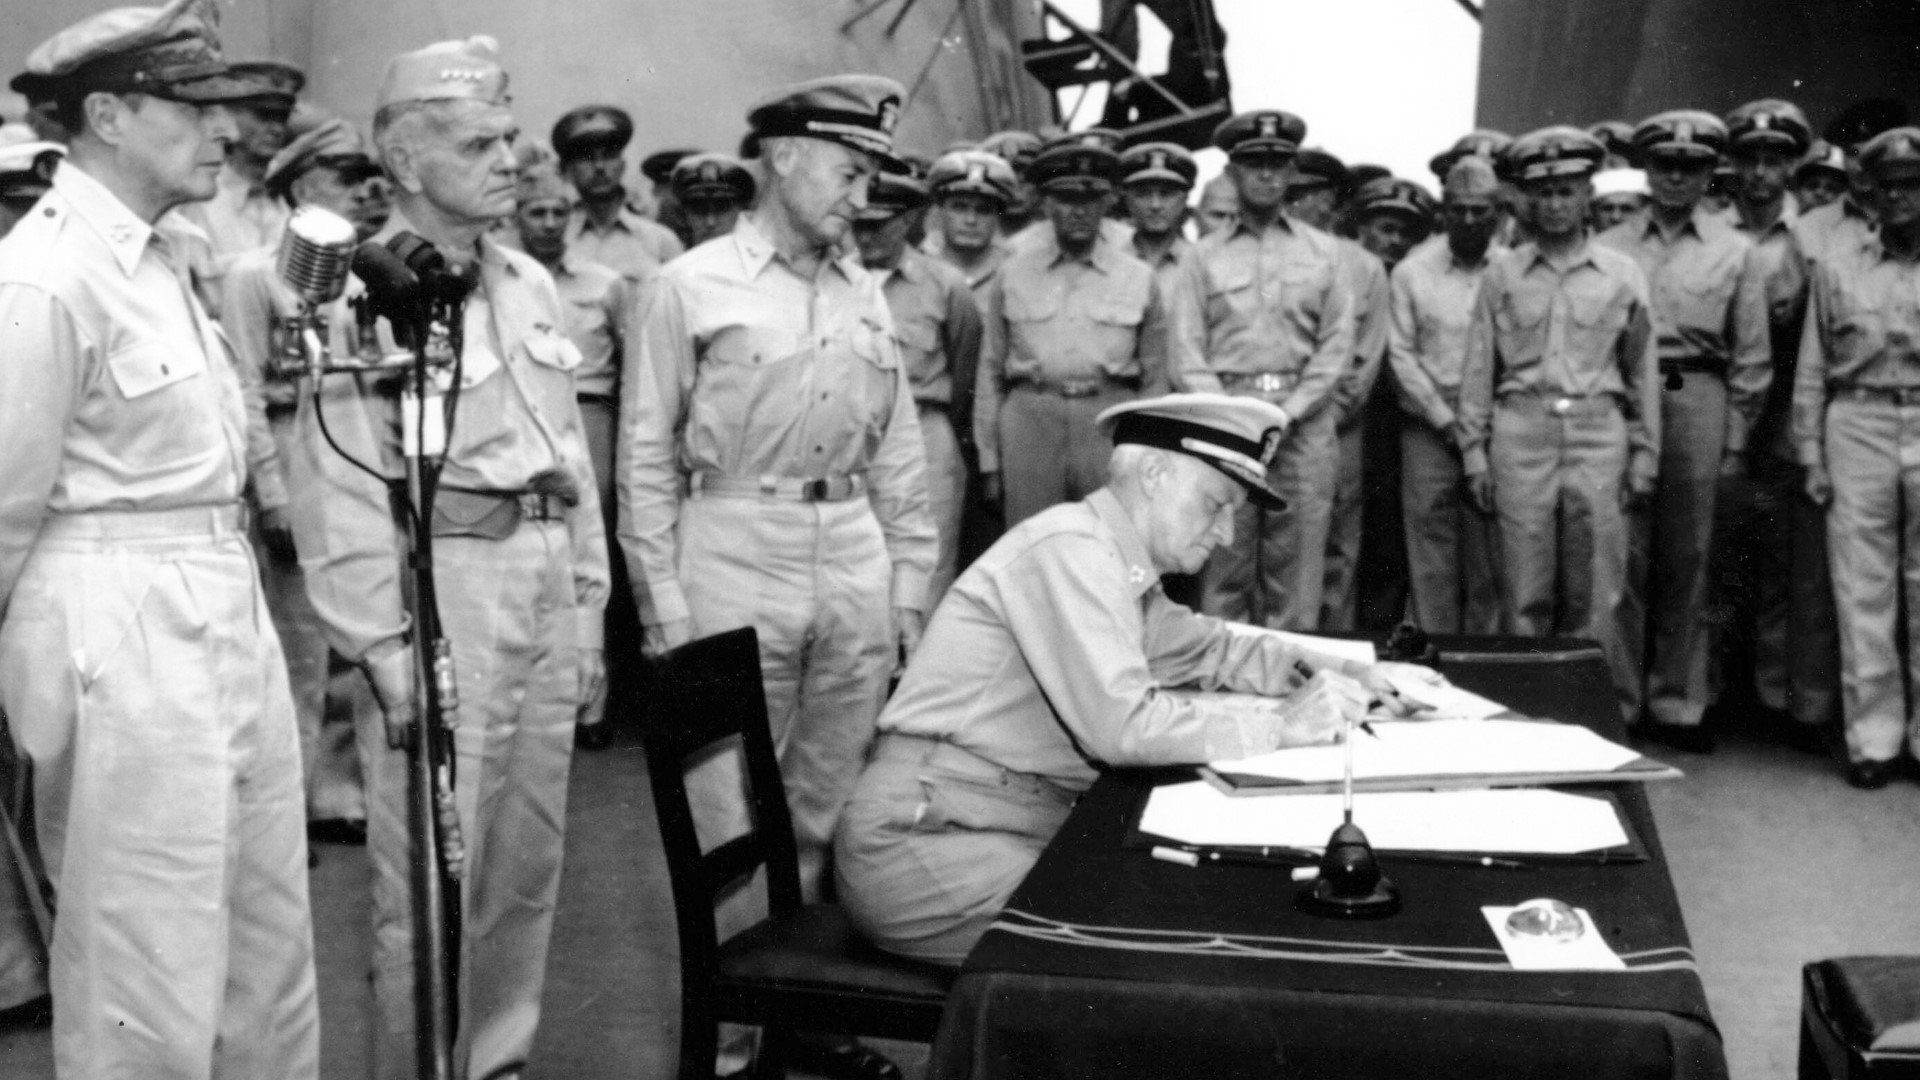 The history of Japan's surrender in WWII on Sept. 2, 1945 | cbs8.com